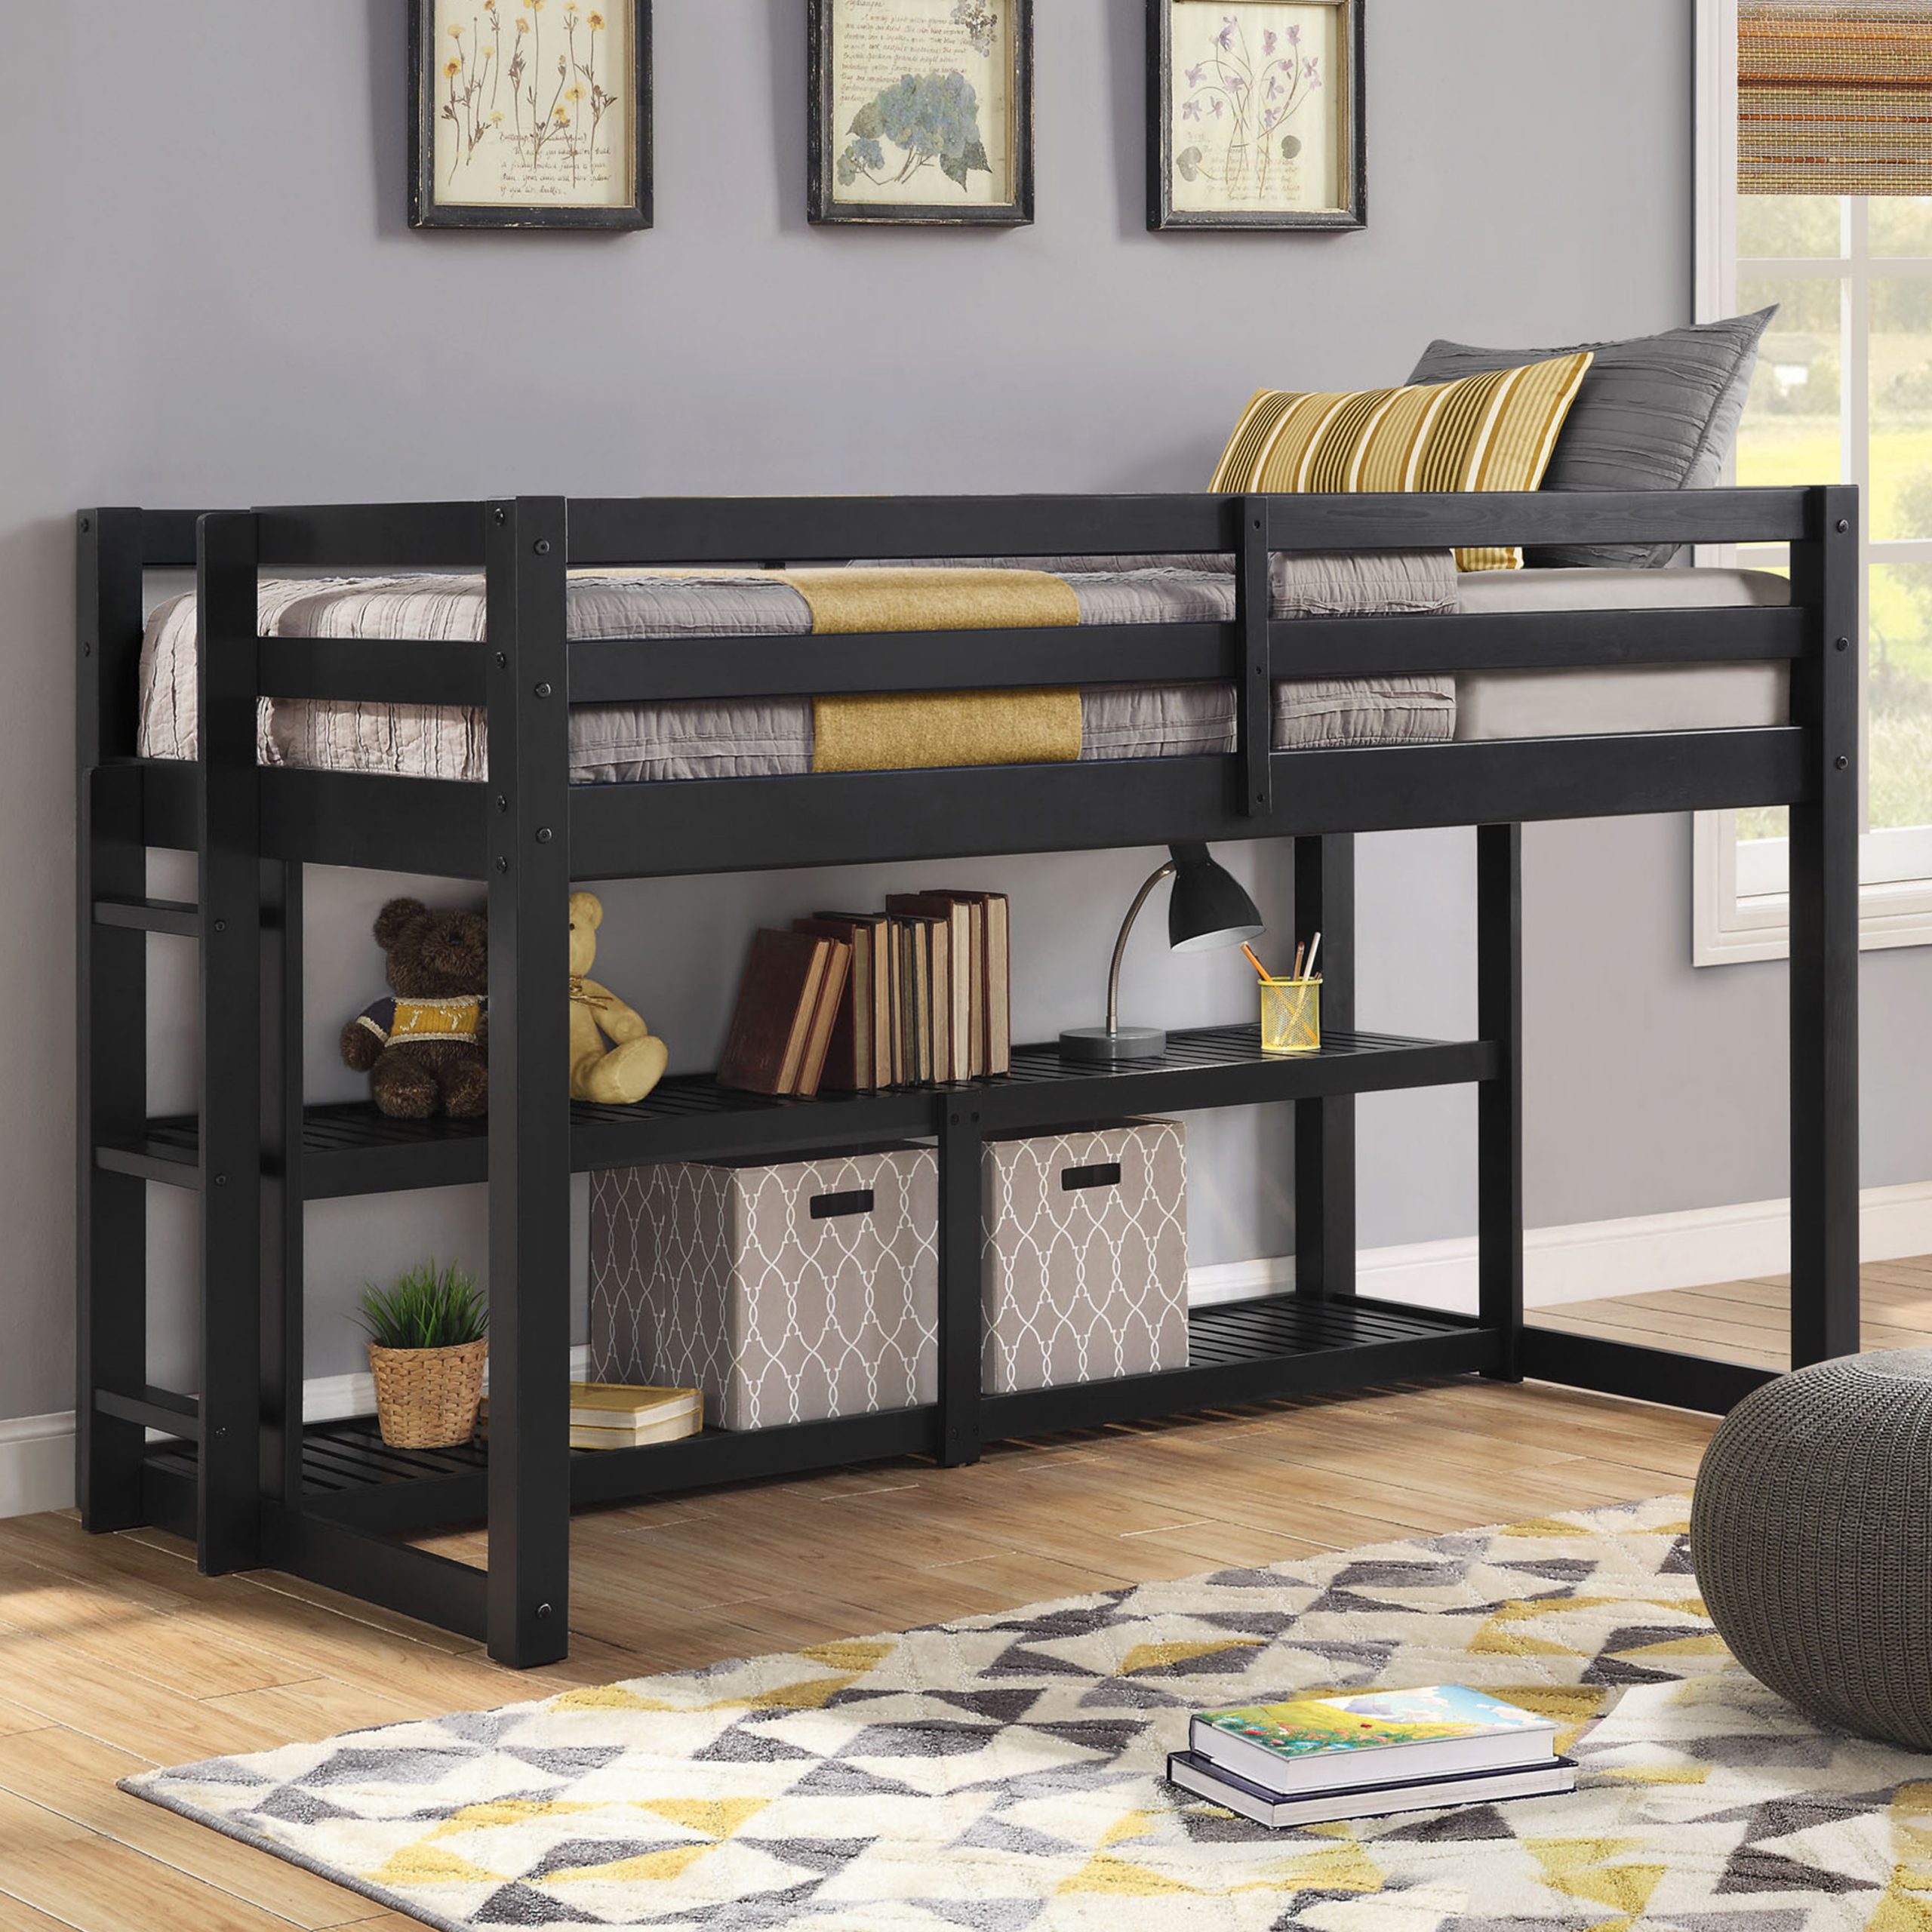 Better Homes And Gardens Greer Loft Storage Bed Instructions - FEQTUTF